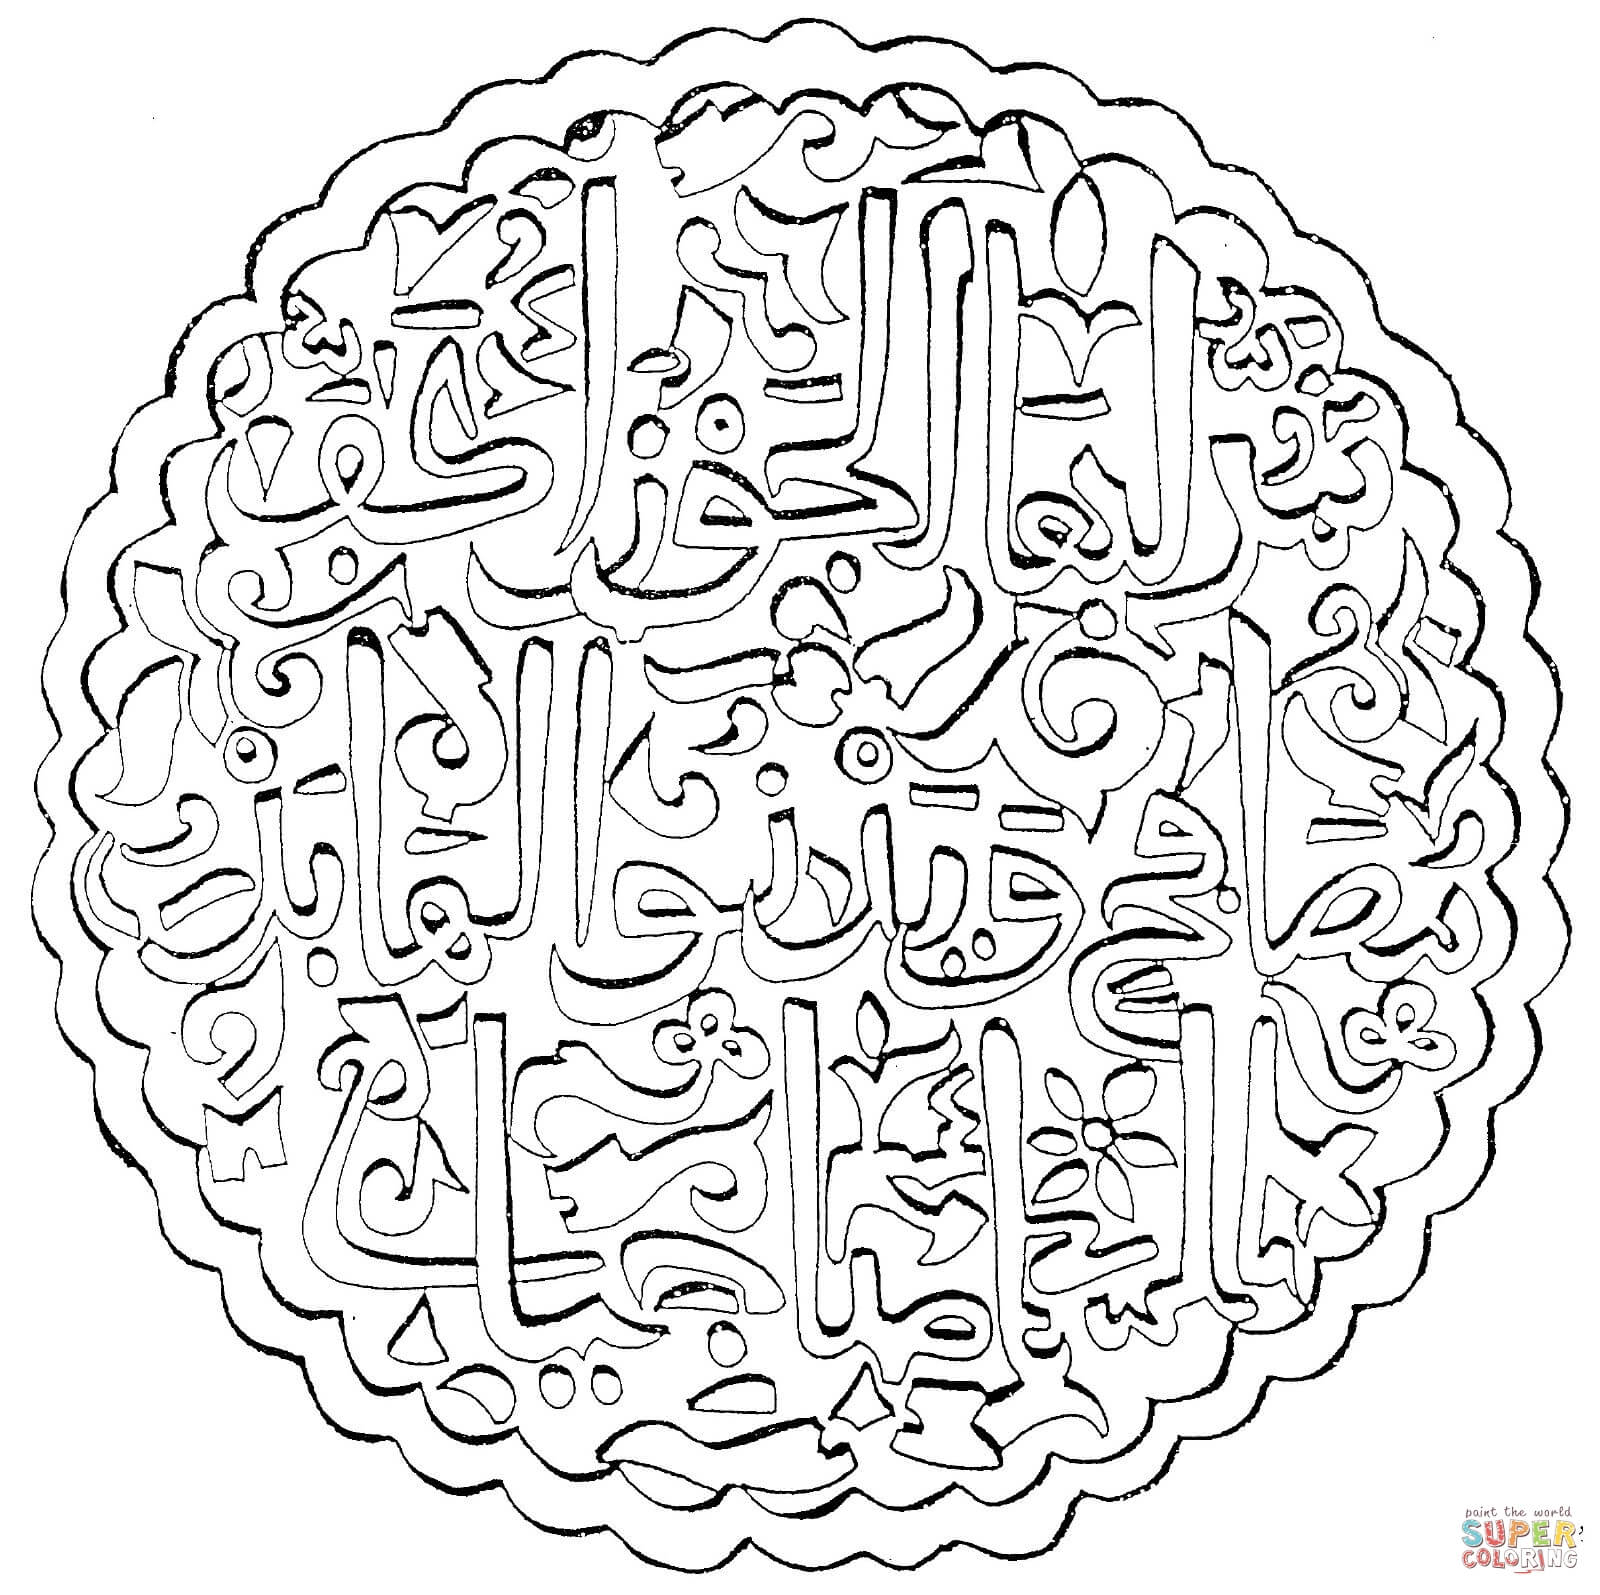 Morocco Coloring Pages Moroccan Tile Coloring Page Free Printable Coloring Pages